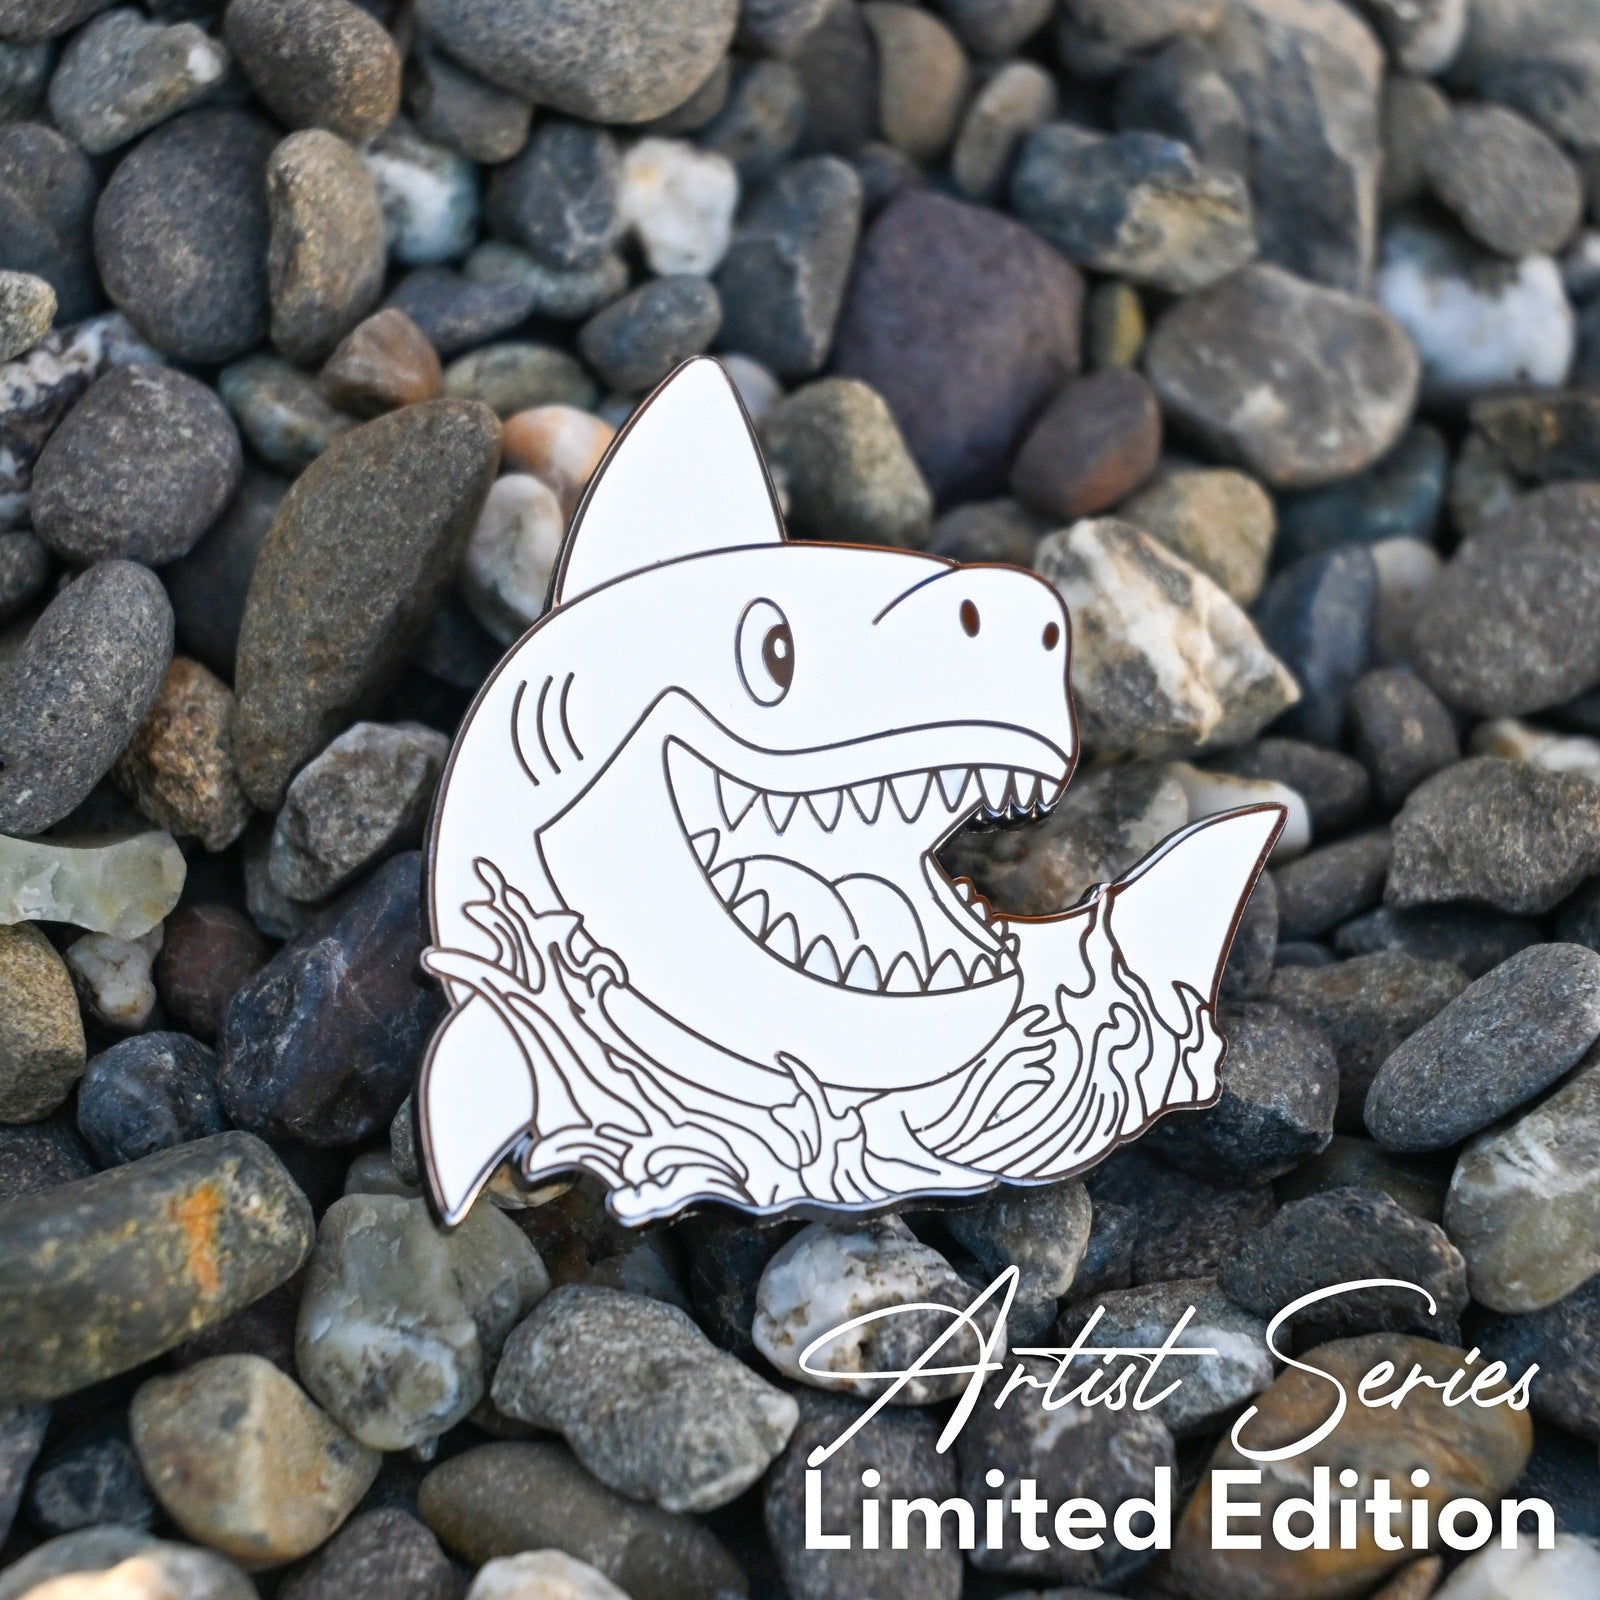 Arcadia Collectibles Artist Series B&W Shark with Bump-N-Bite Exclusive White Glow - LE 20 - LIMIT 1